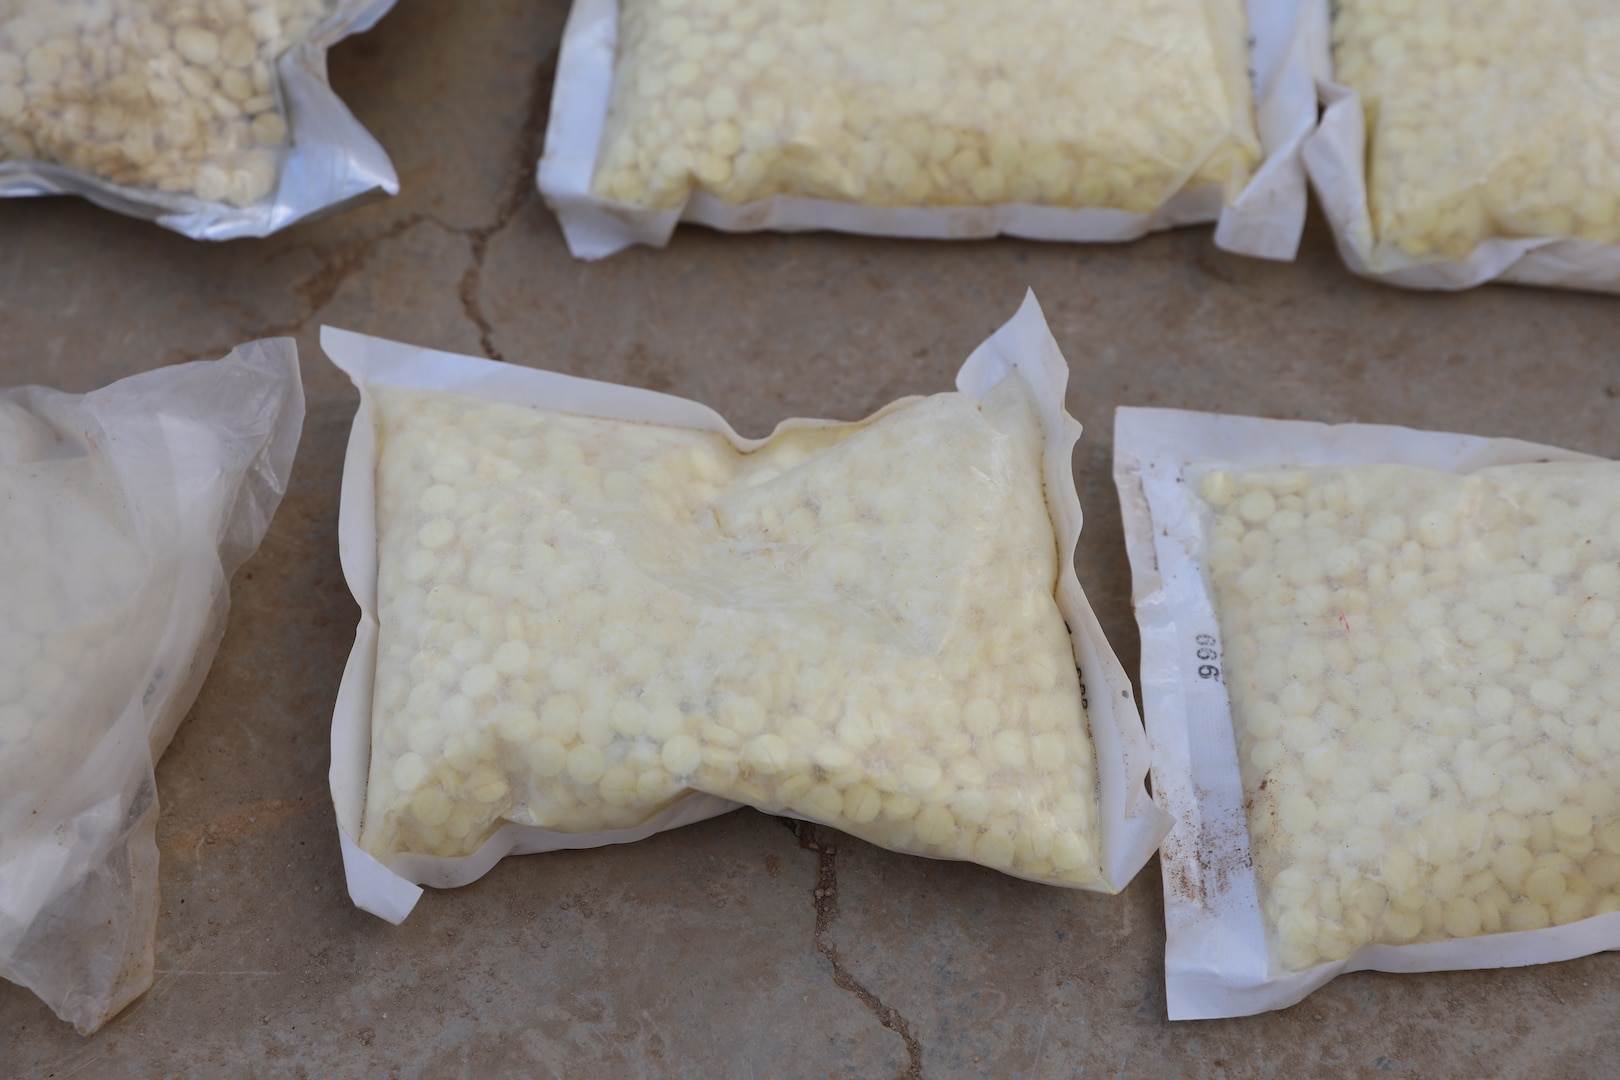 Coalition-aligned security force Maghaweir al-Thowra seize $3.5 million in illicit drugs, including nearly 850,000 regional amphetamine Captagon pills,
used to fund so-called Islamic State operations, in southern Syria, October 23, 2019 (U.S. Army/Kyle Alvarez)